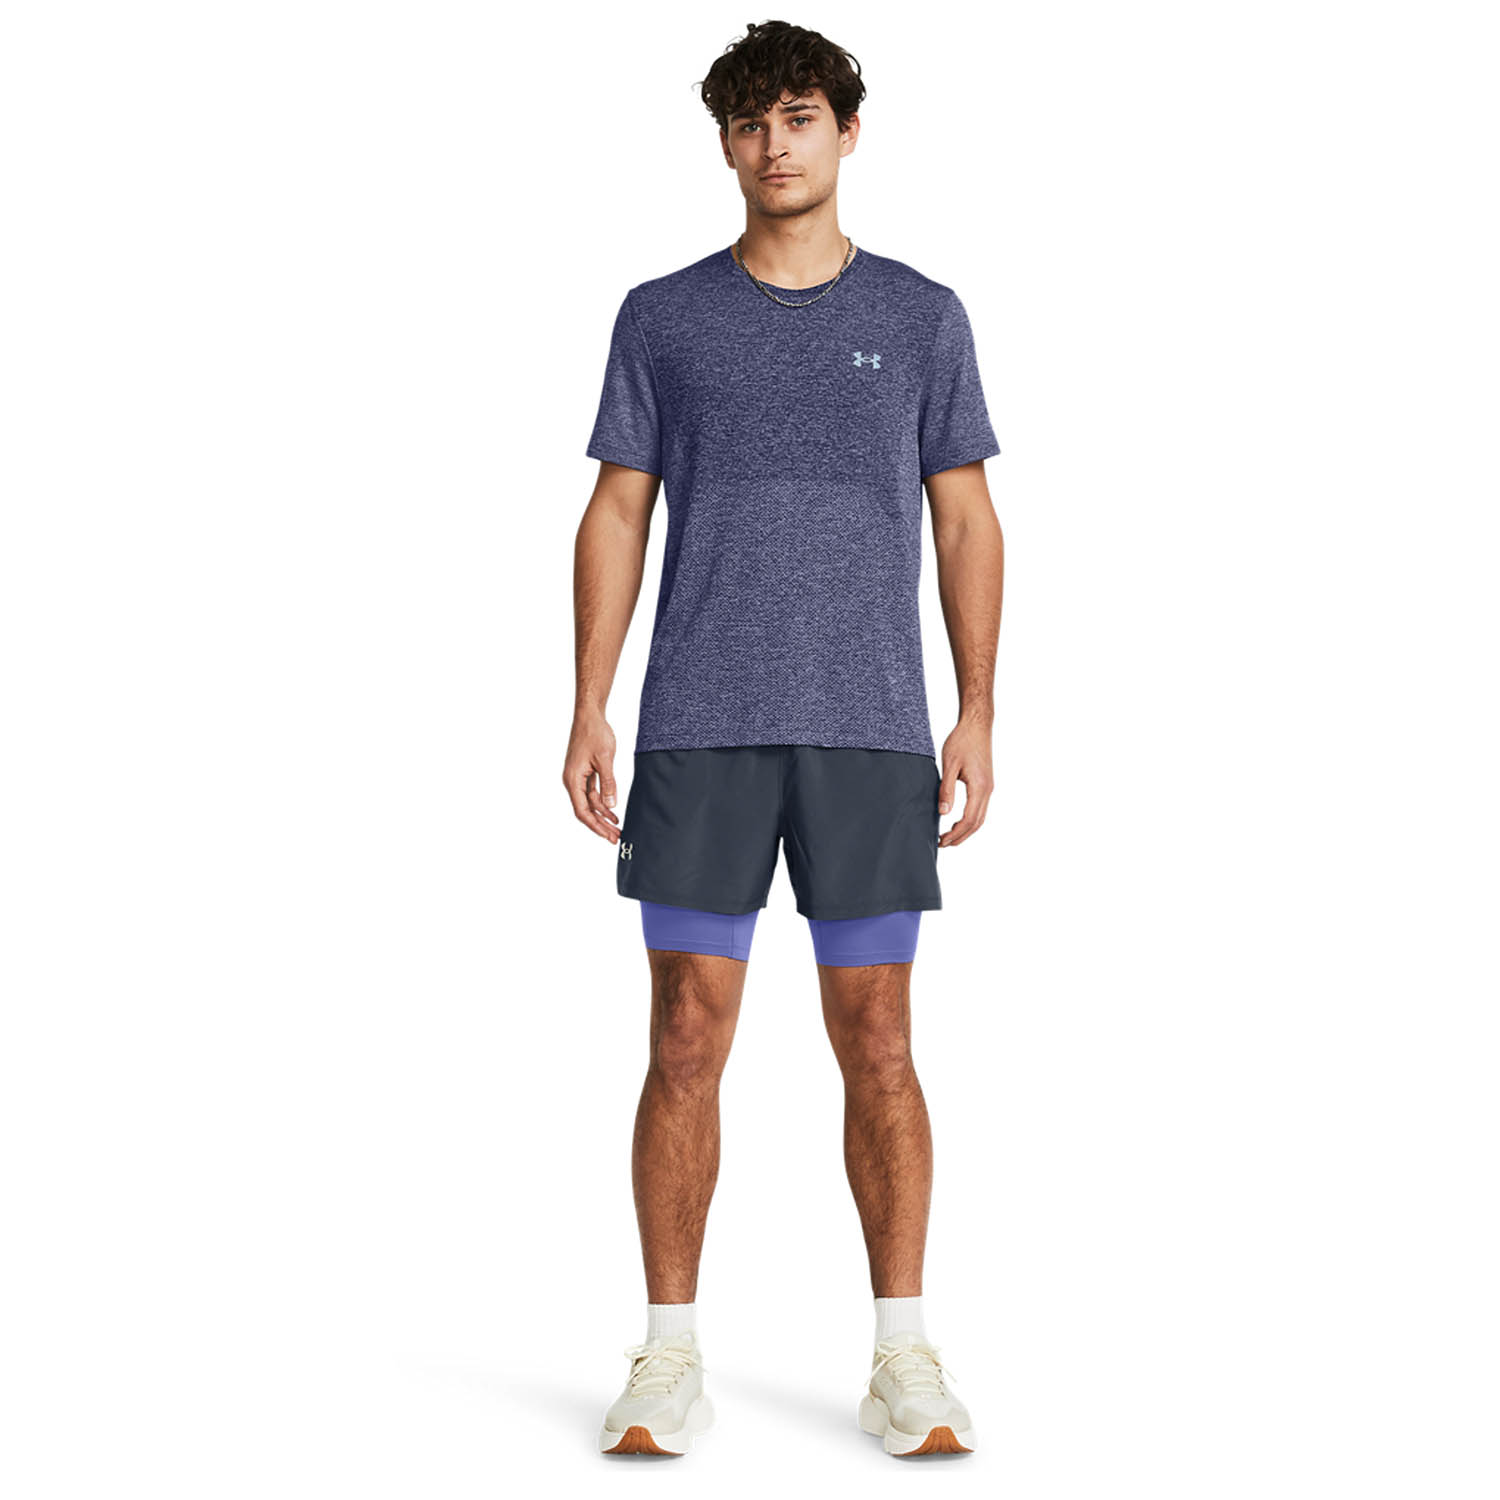 Under Armour Launch 5in 2 in 1 Pantaloncini - Downpuor Gray/Starlight/Reflective